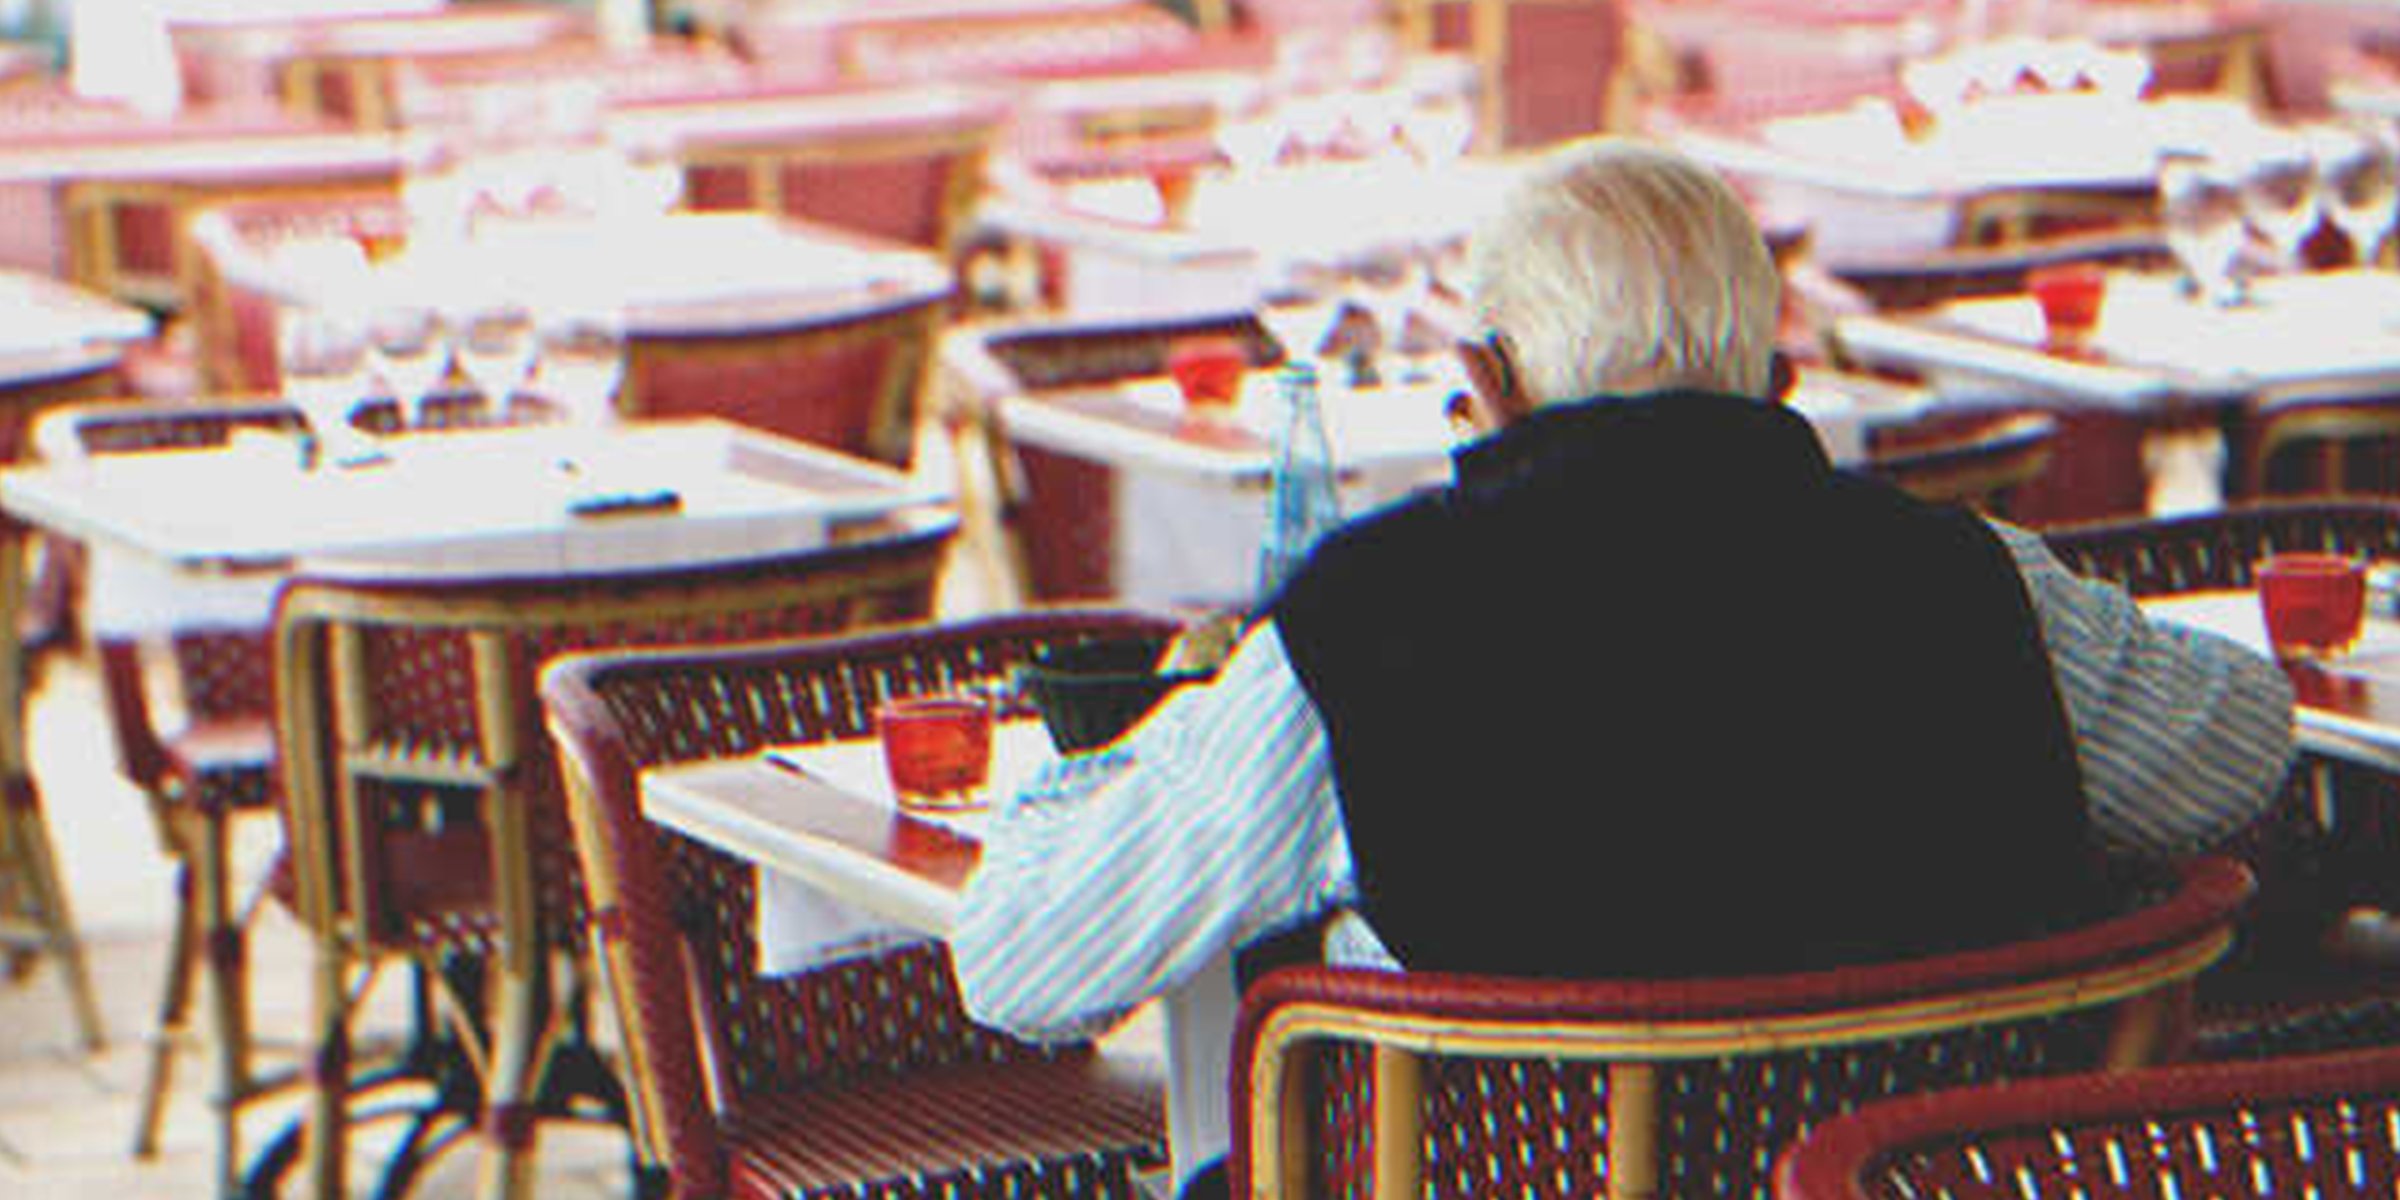 Harold's customer was someone special. | Source: Pexels